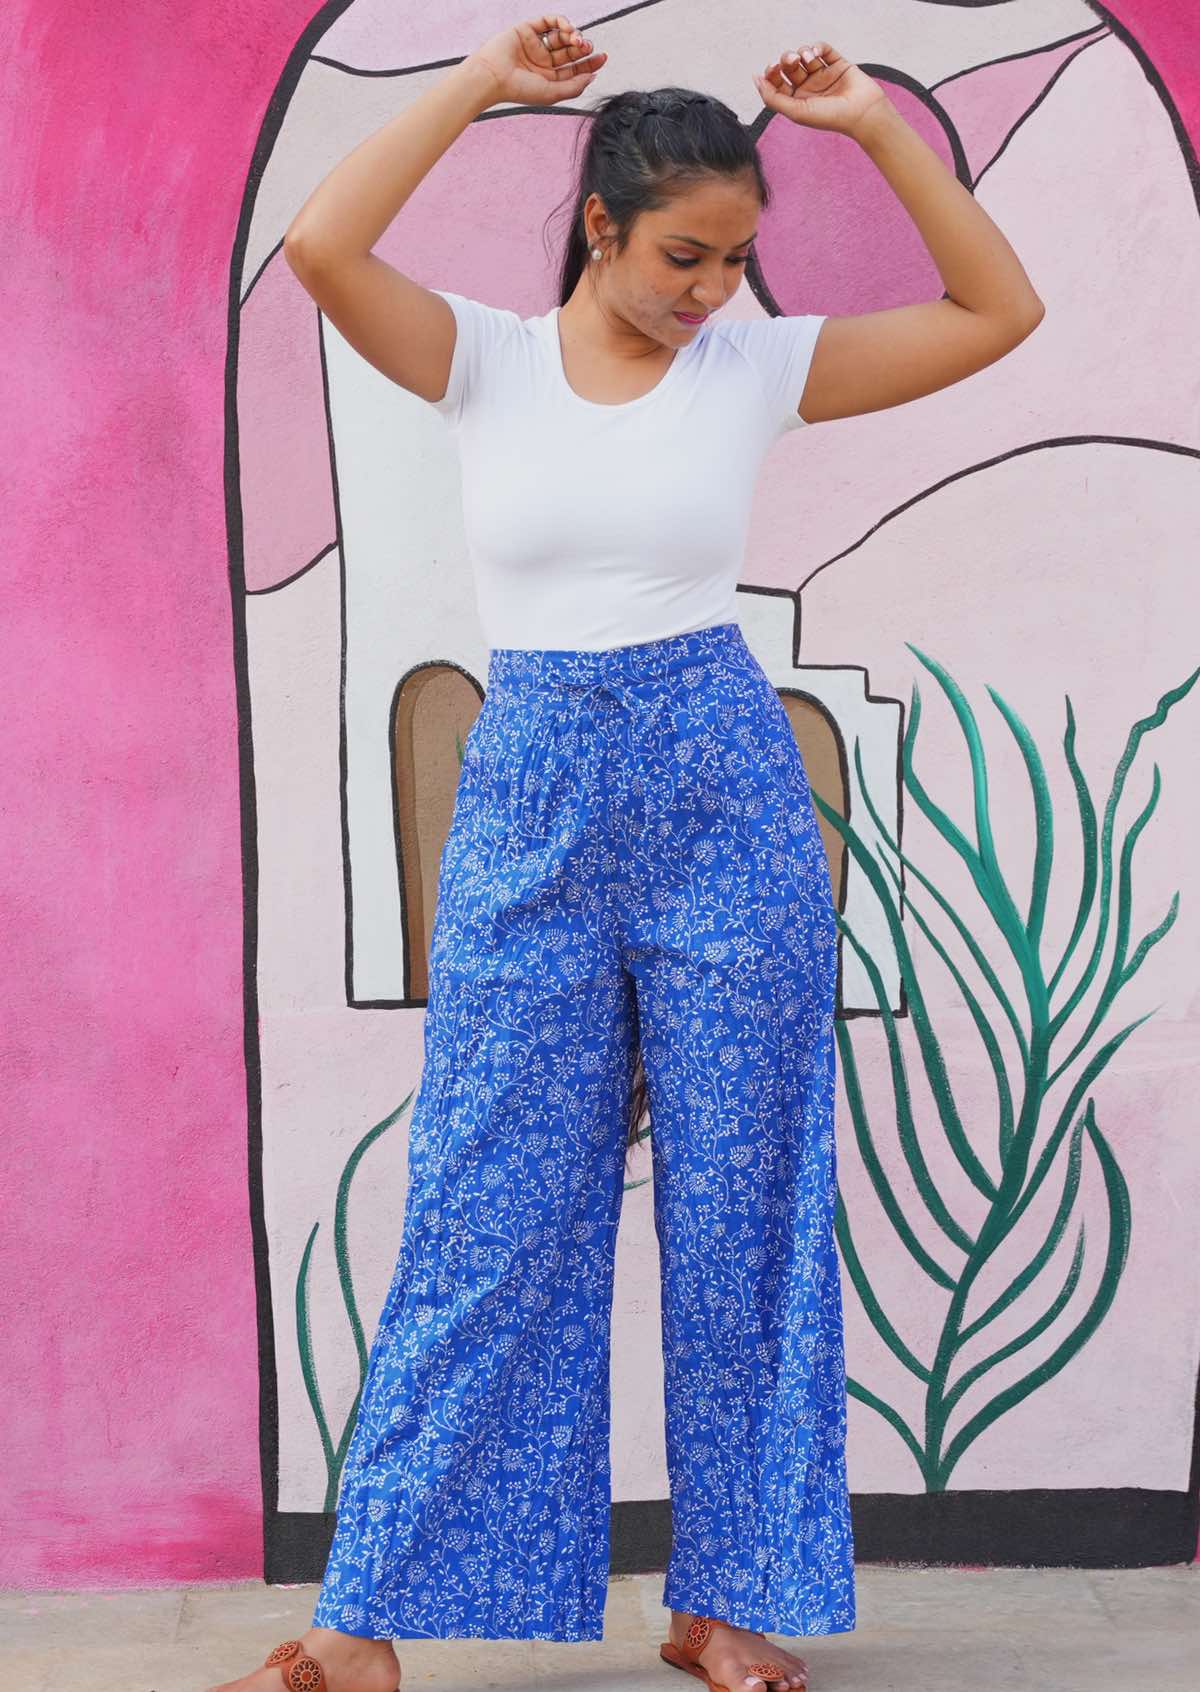 High waisted blue cotton pants with delicate white floral print